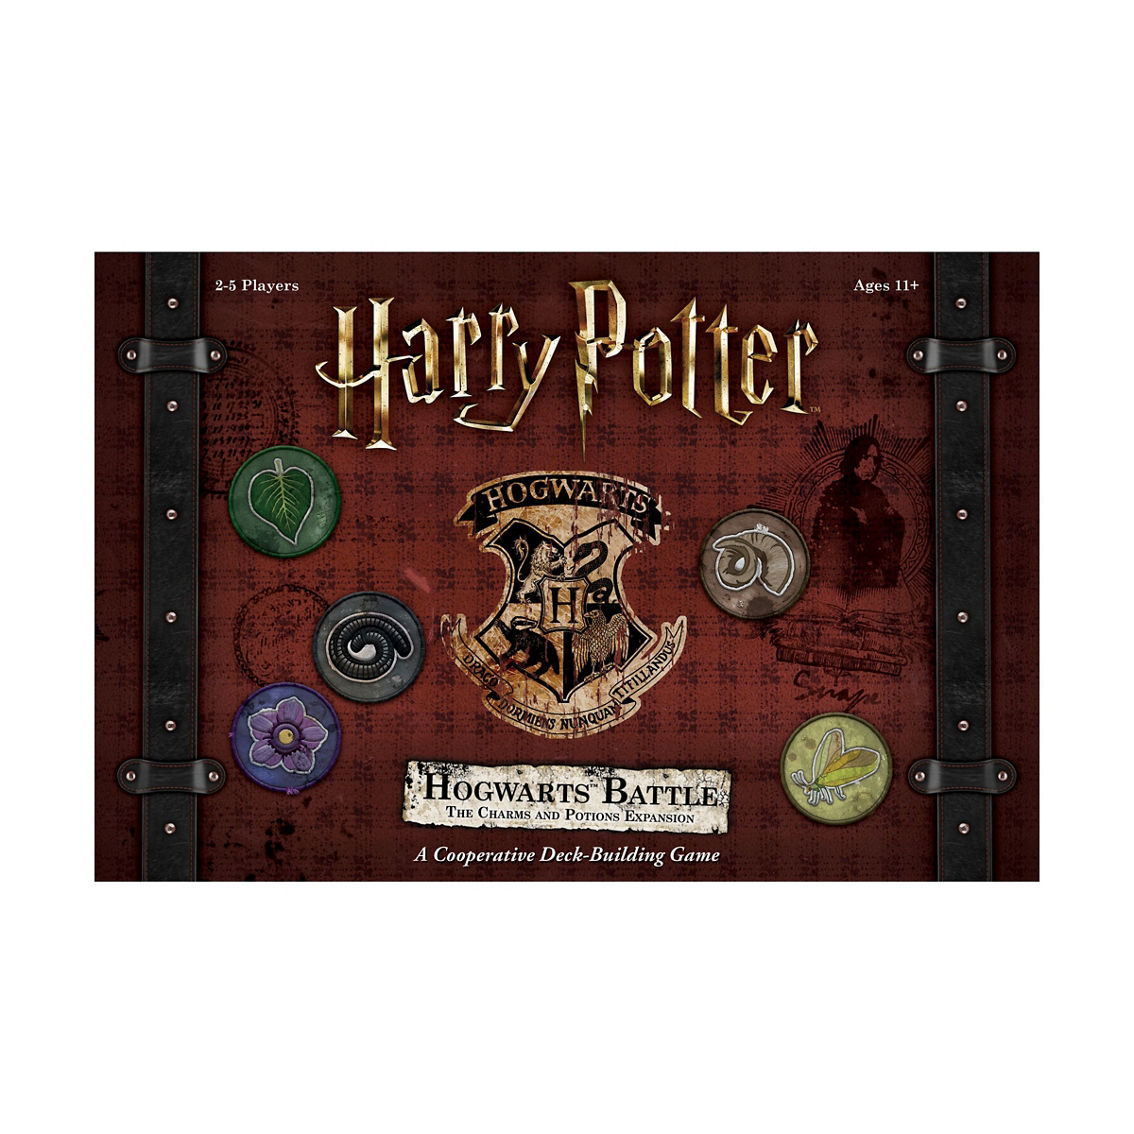 USAopoly Harry Potter Hogwarts Battle: The Charms and Potions Expansion - Image 2 of 5